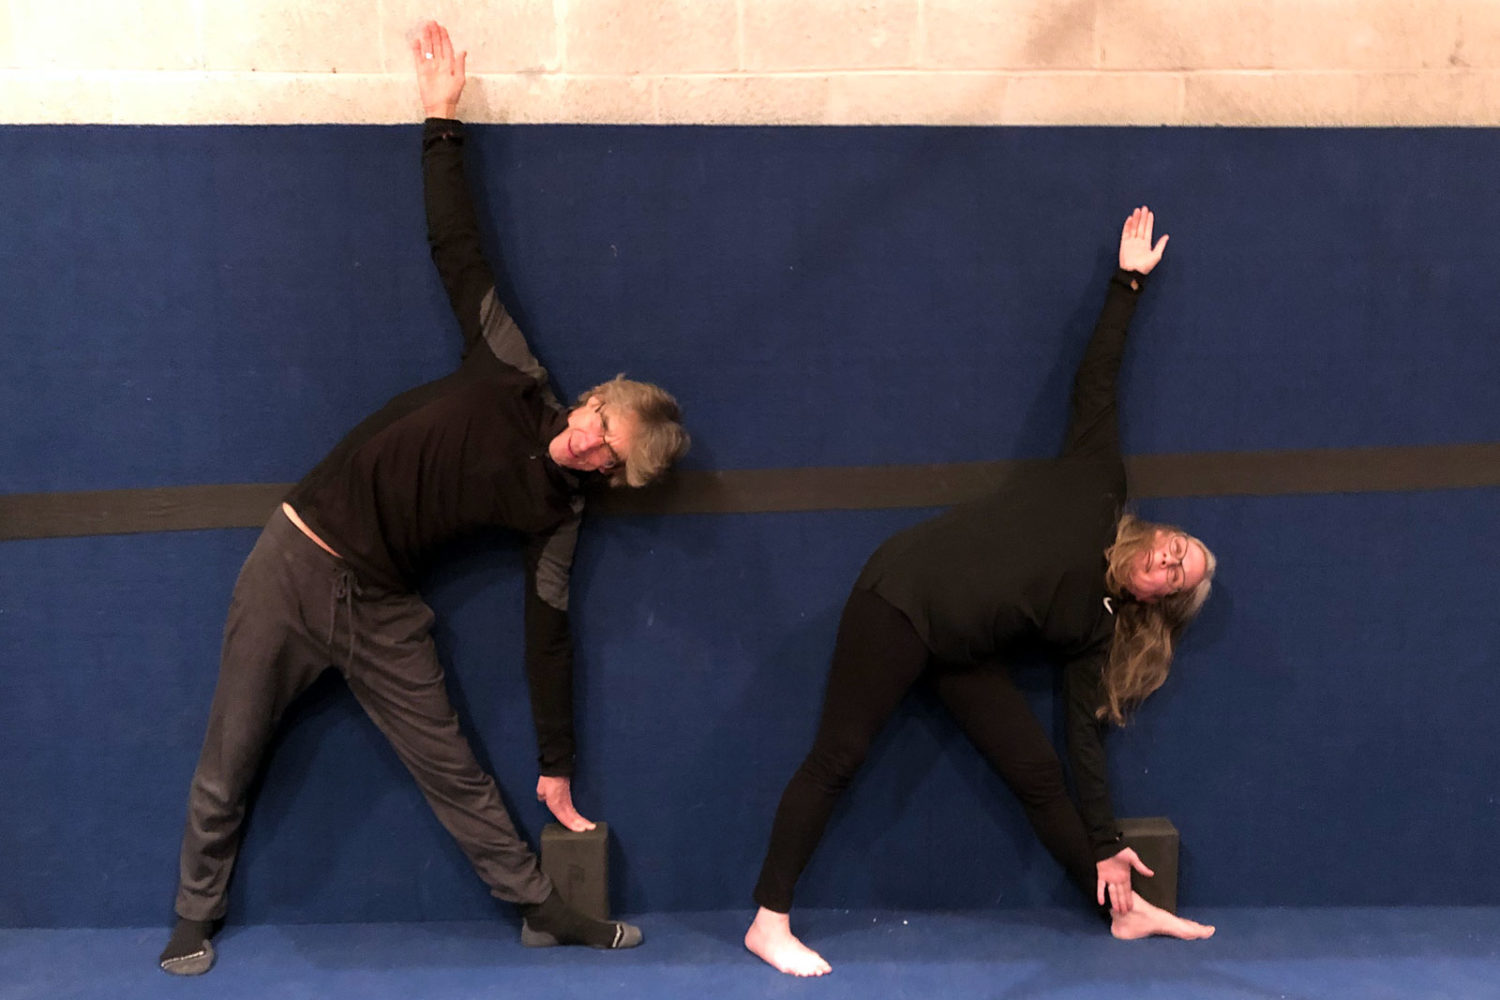 Paul and Peggi doing triangle pose against the wall in yoga class